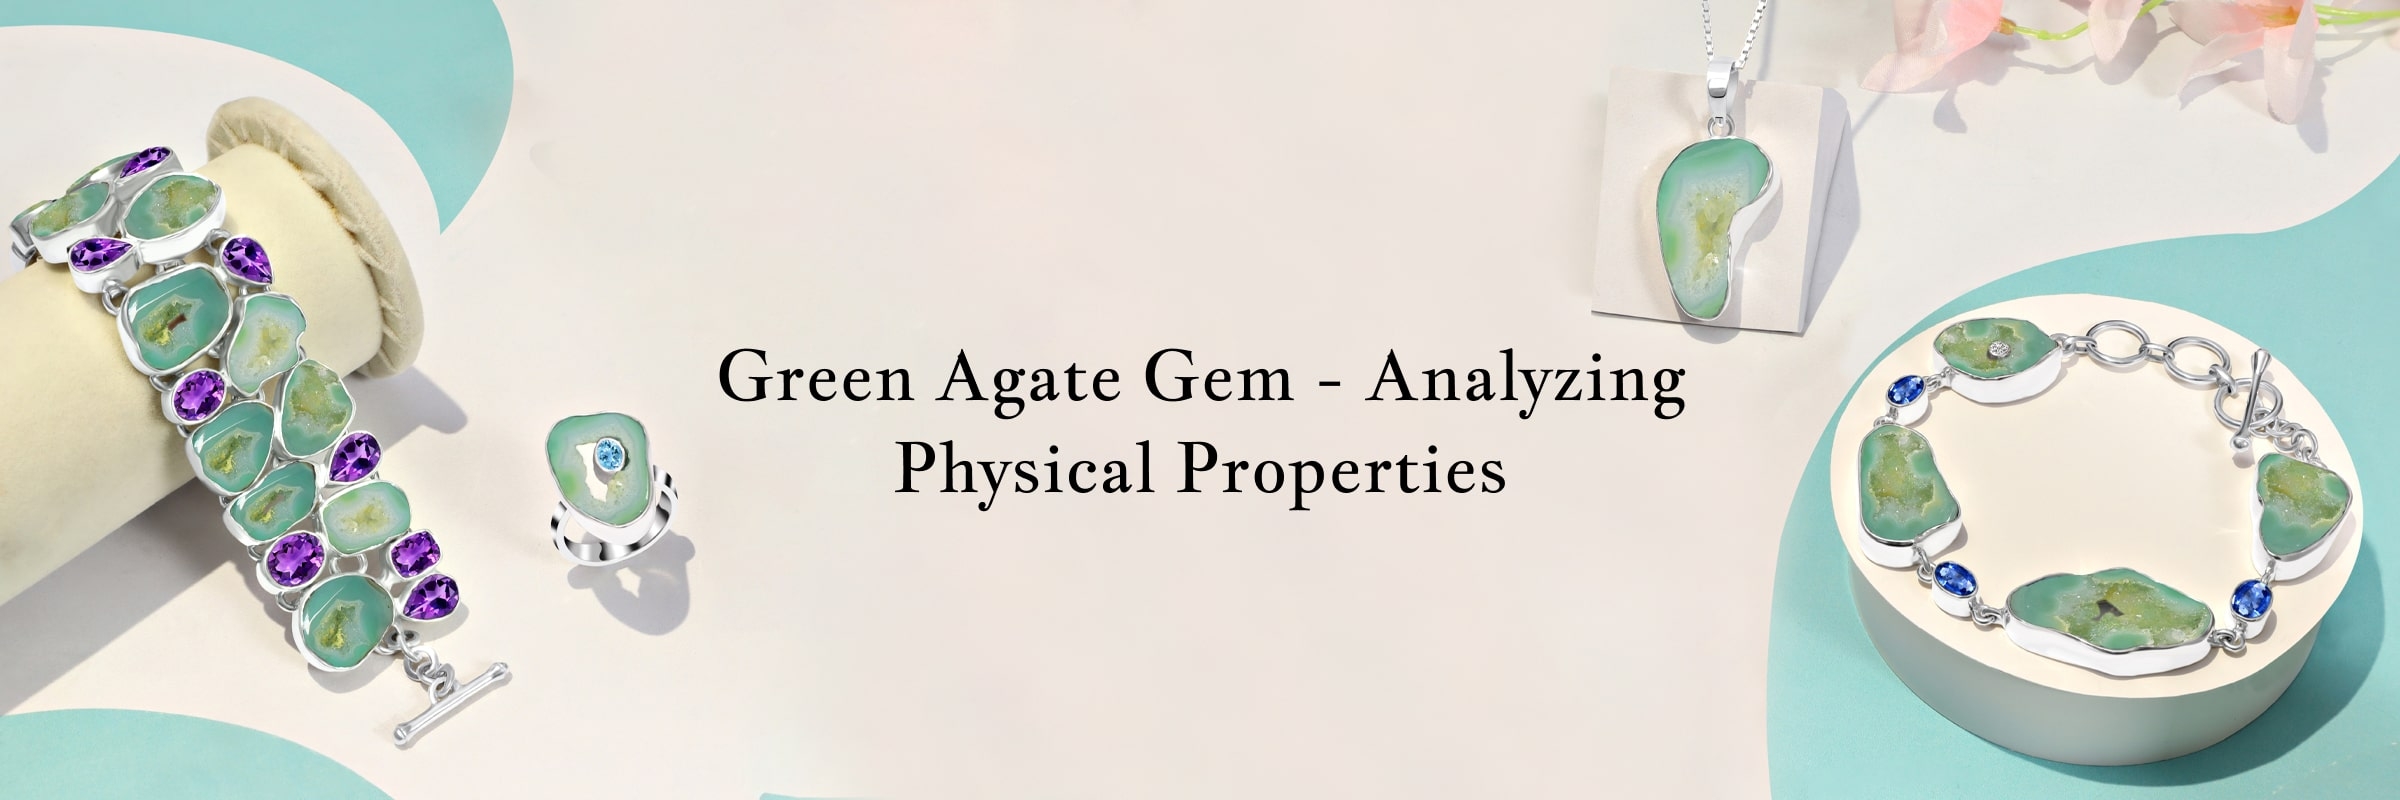 Physical Properties of Green Agate Gem